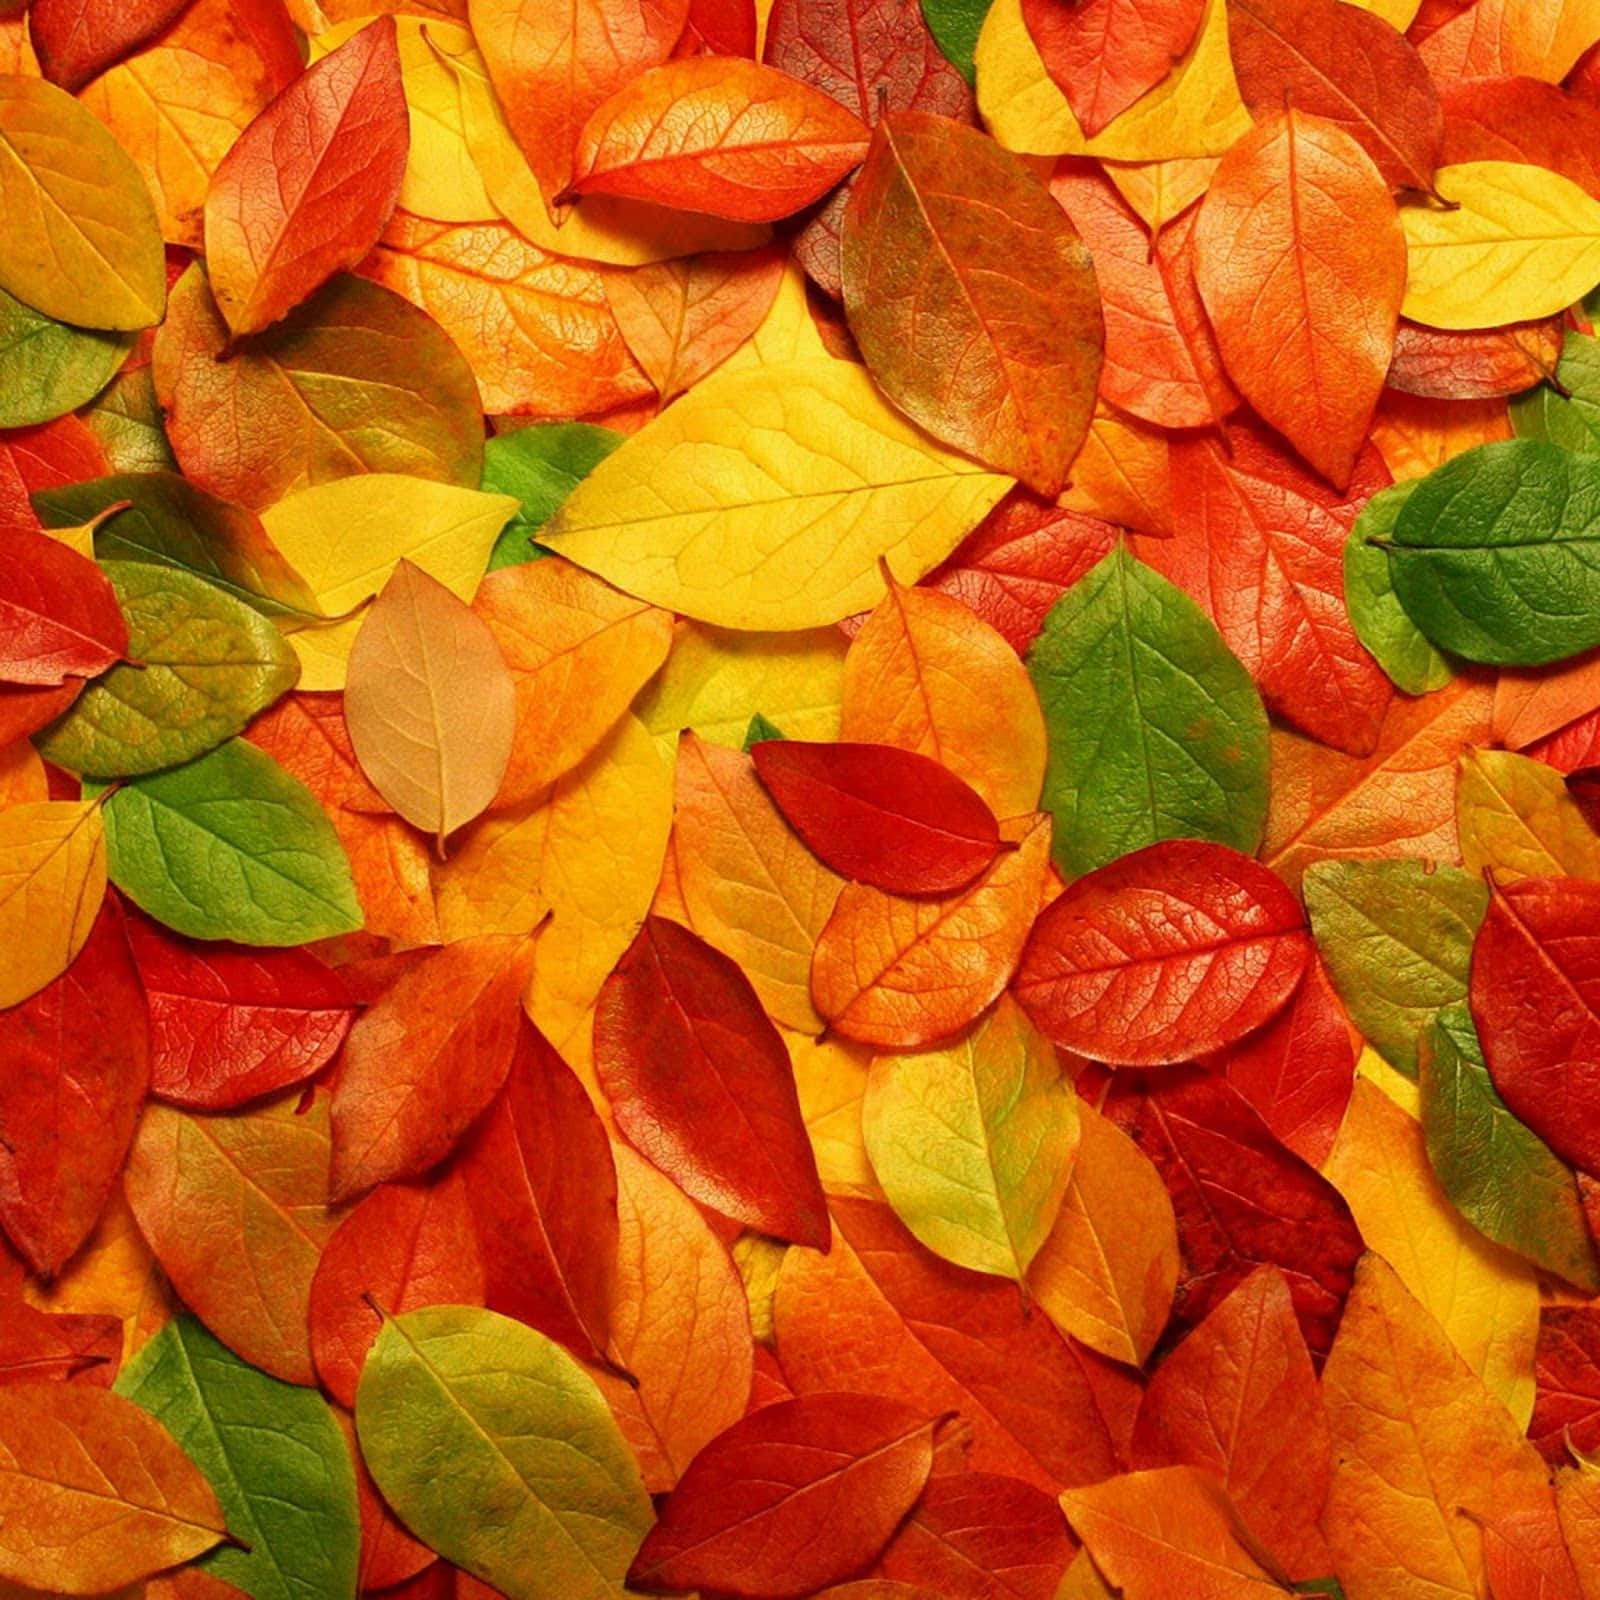 Get Ready for Fall with the Ipad Wallpaper